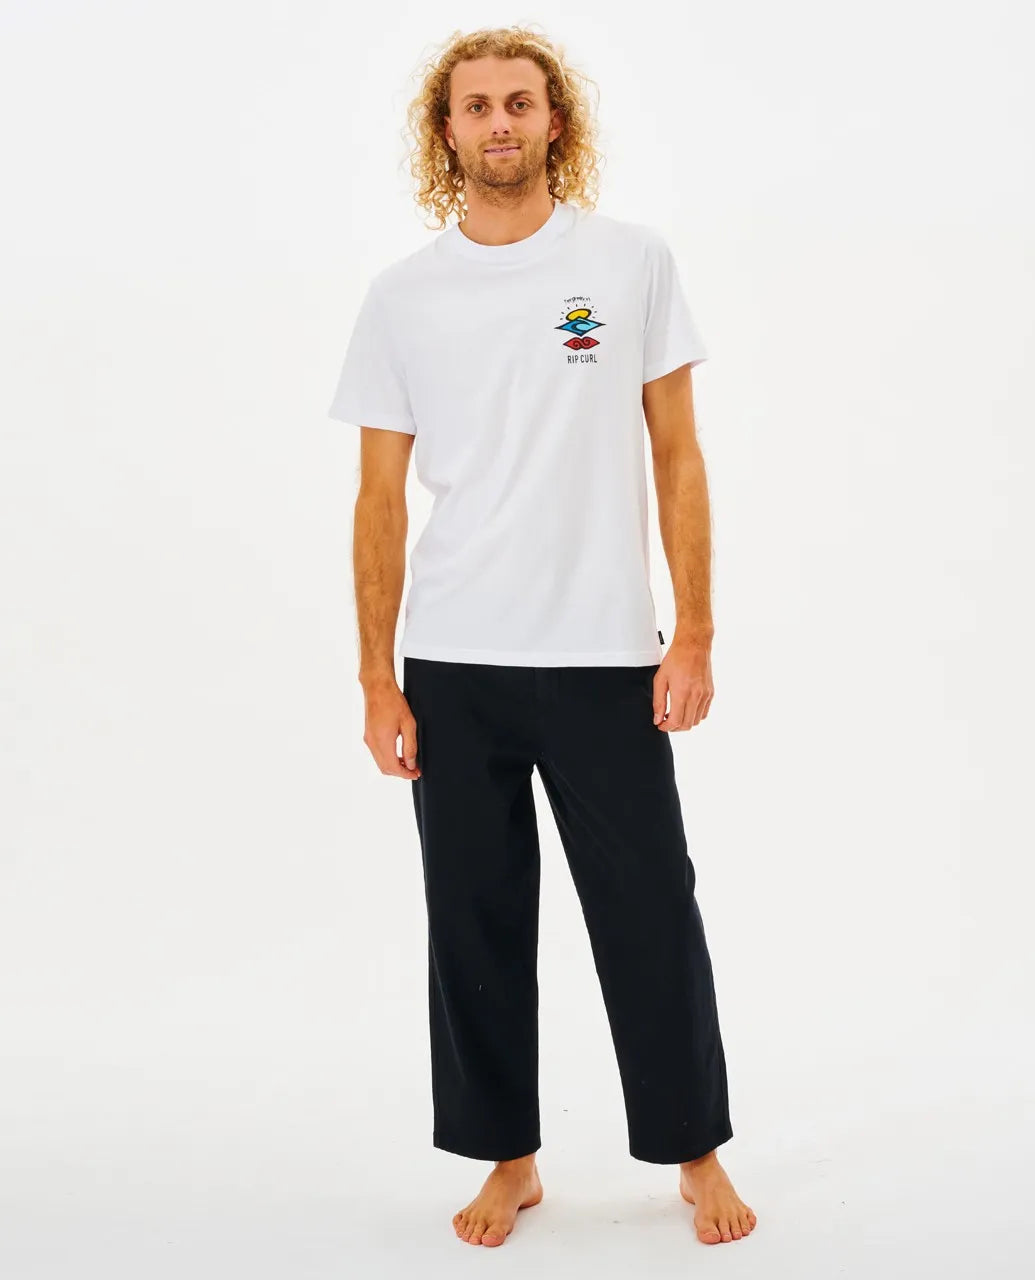 Quality Surf Products Pant - Rip Curl - Beechworth Emporium